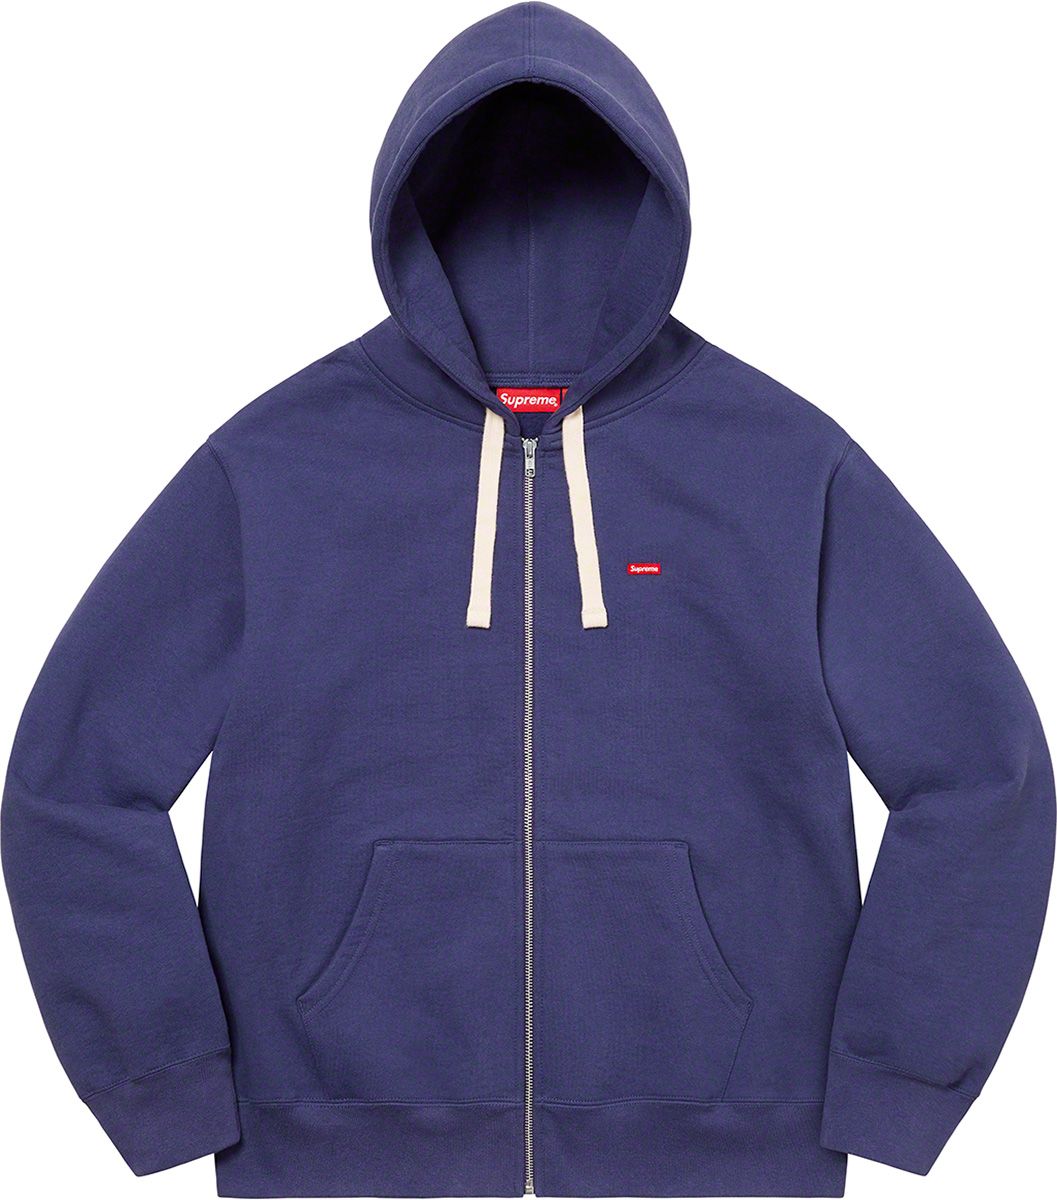 Doughboy Zip Up Hooded Sweatshirt - Fall/Winter 2022 Preview – Supreme